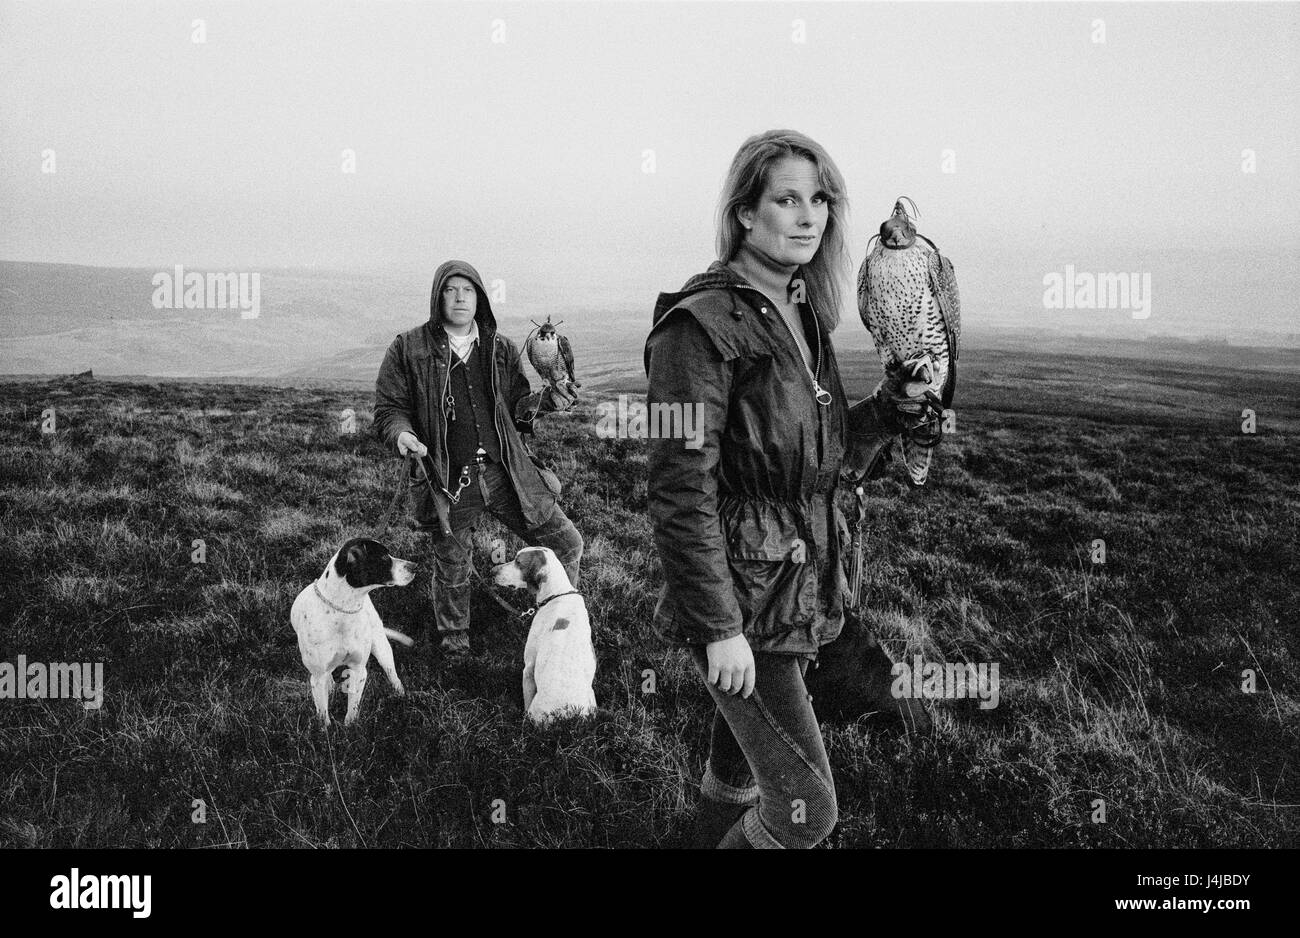 Falconers Steve and Emma Ford posing with their falcons and hunting dogs on the moors in Gleneagles, Scotland. Derek Hudson / Alamy Stock Photo Stock Photo